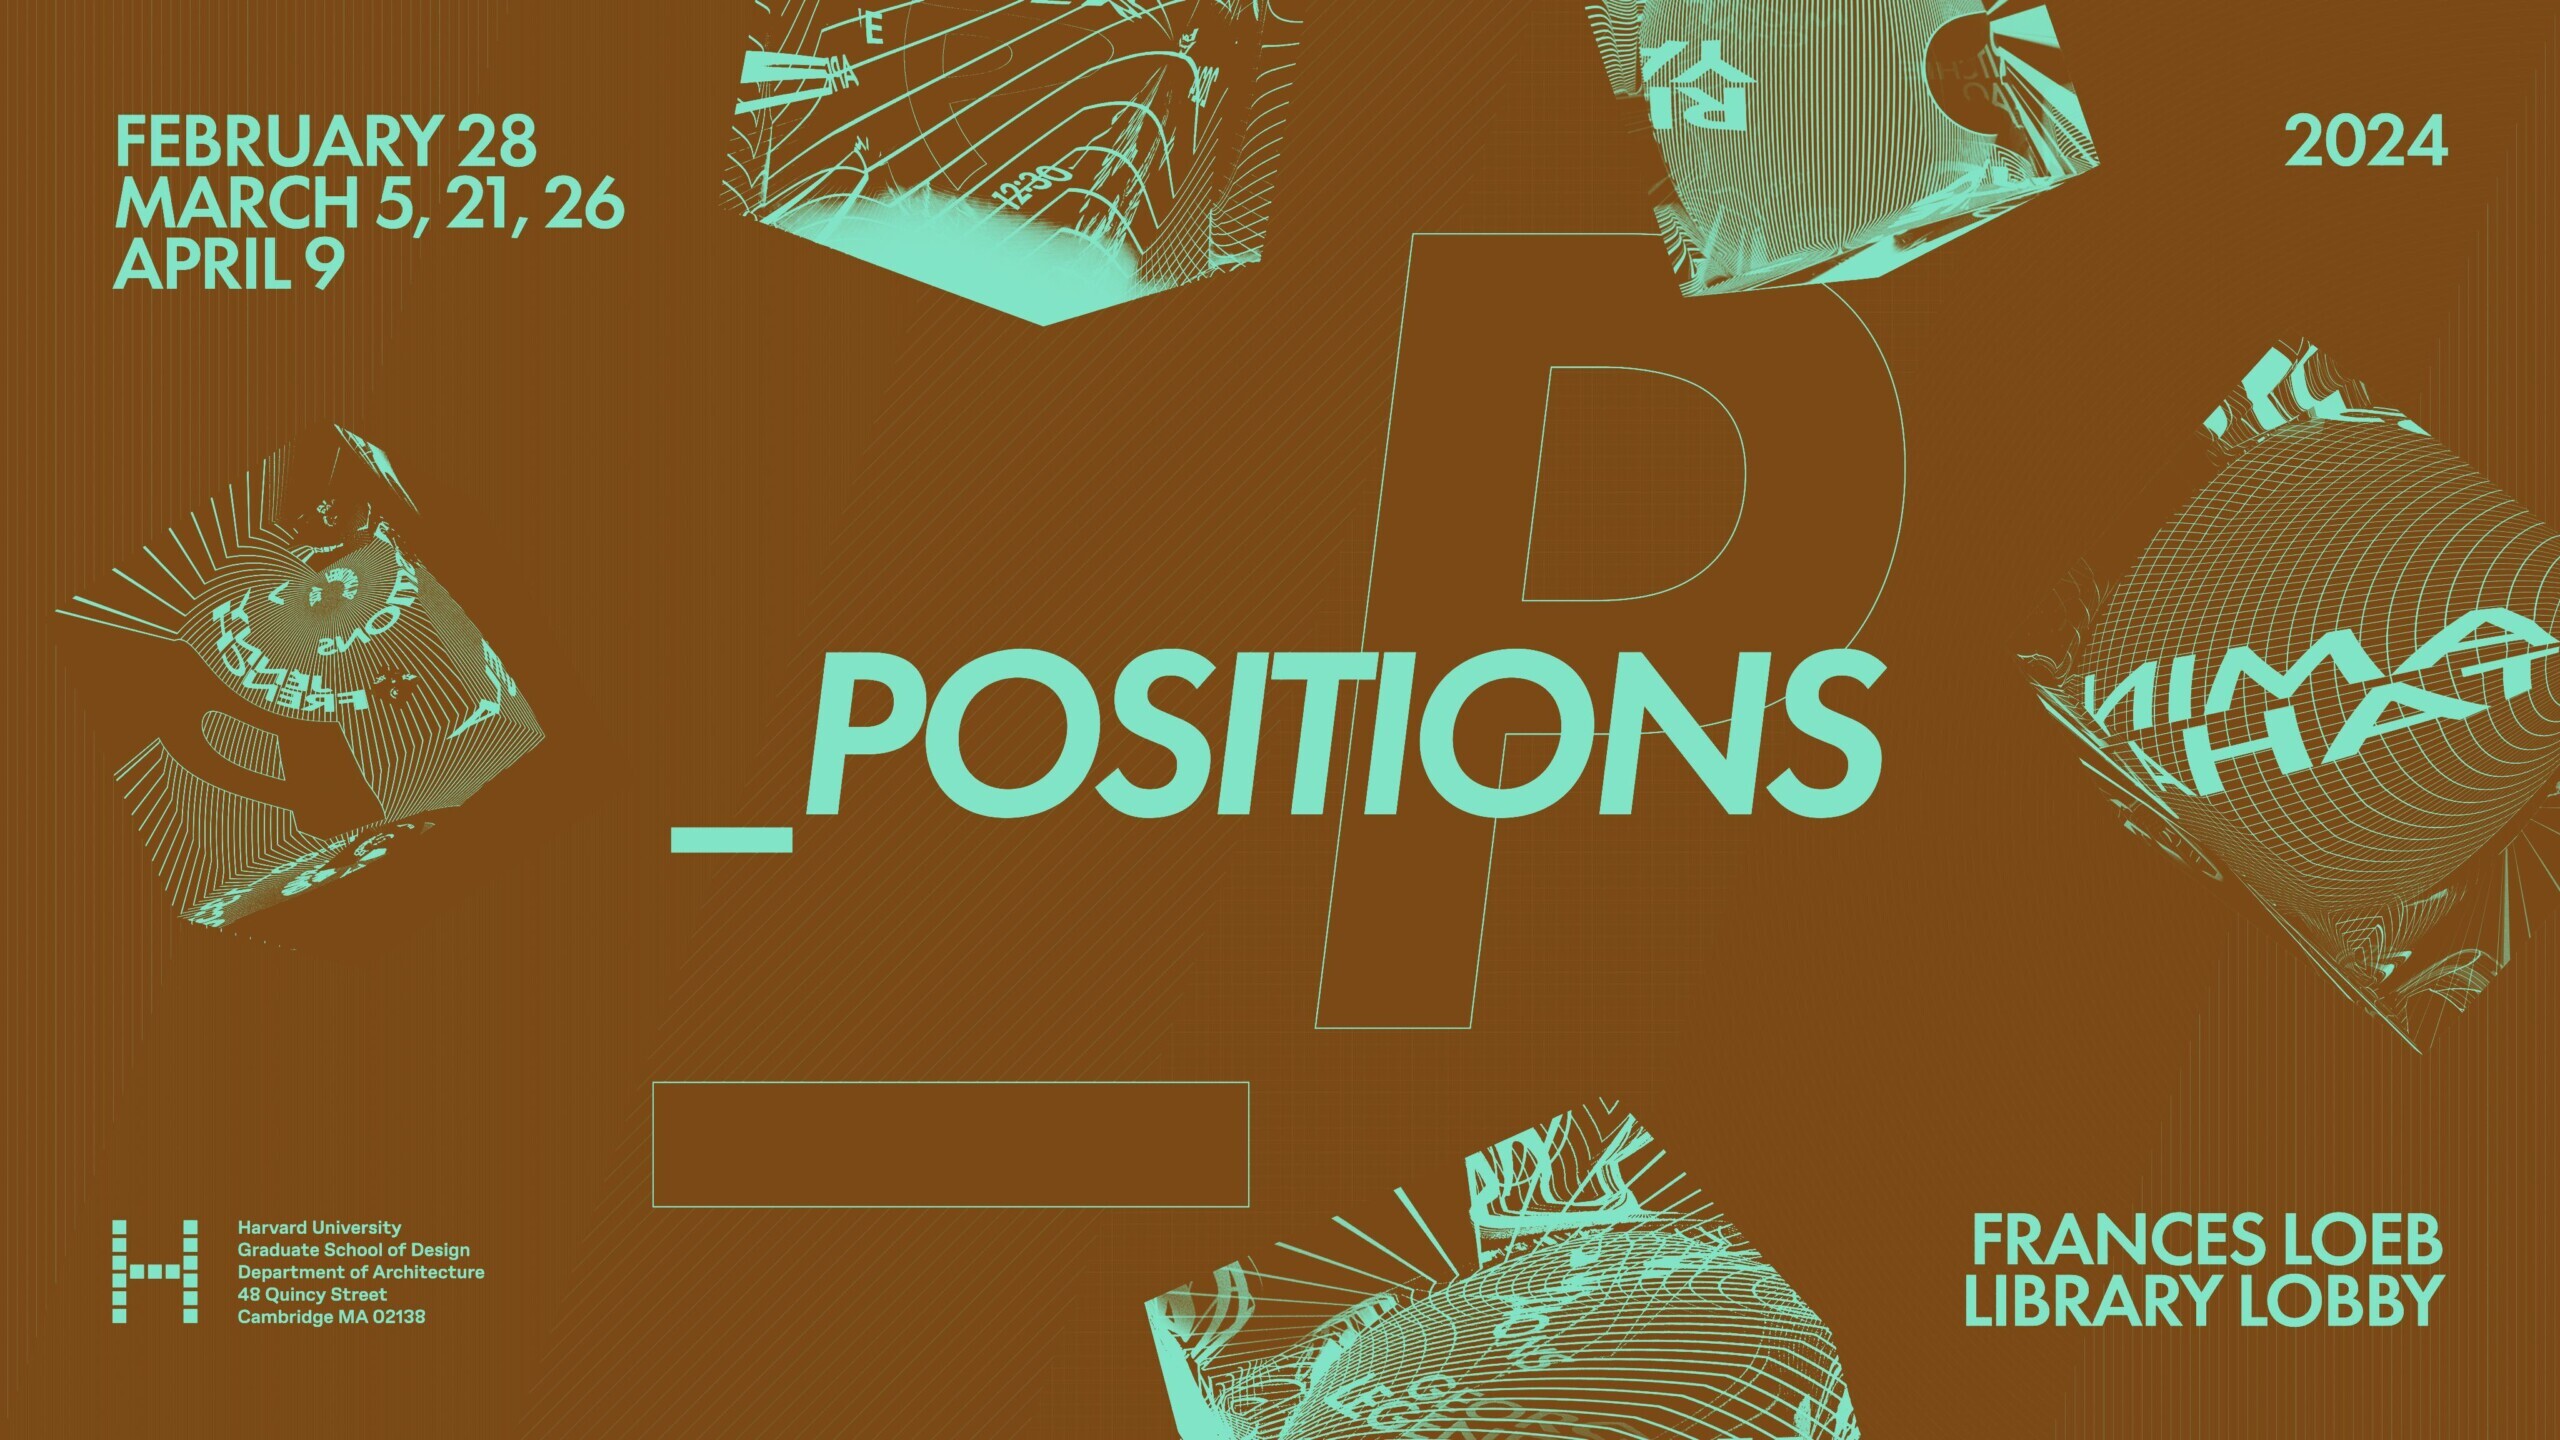 poster for _positions series, orange banner with dates 2/28, 3/5, 3/21, 3/26, and 4/9